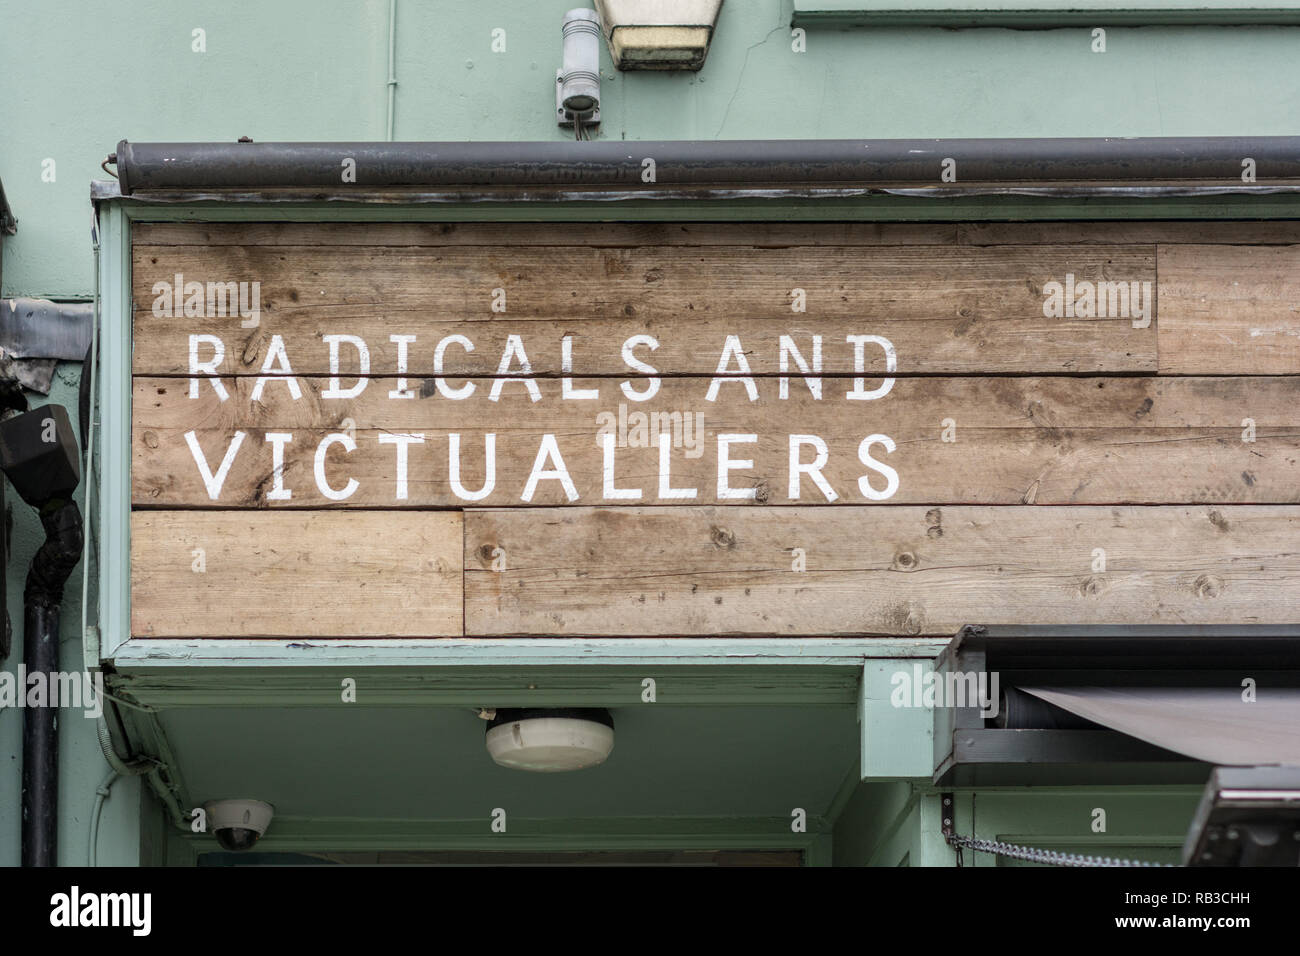 A shop sign in Islington, London: Esence of Islington? Radicals and Victuallers Stock Photo